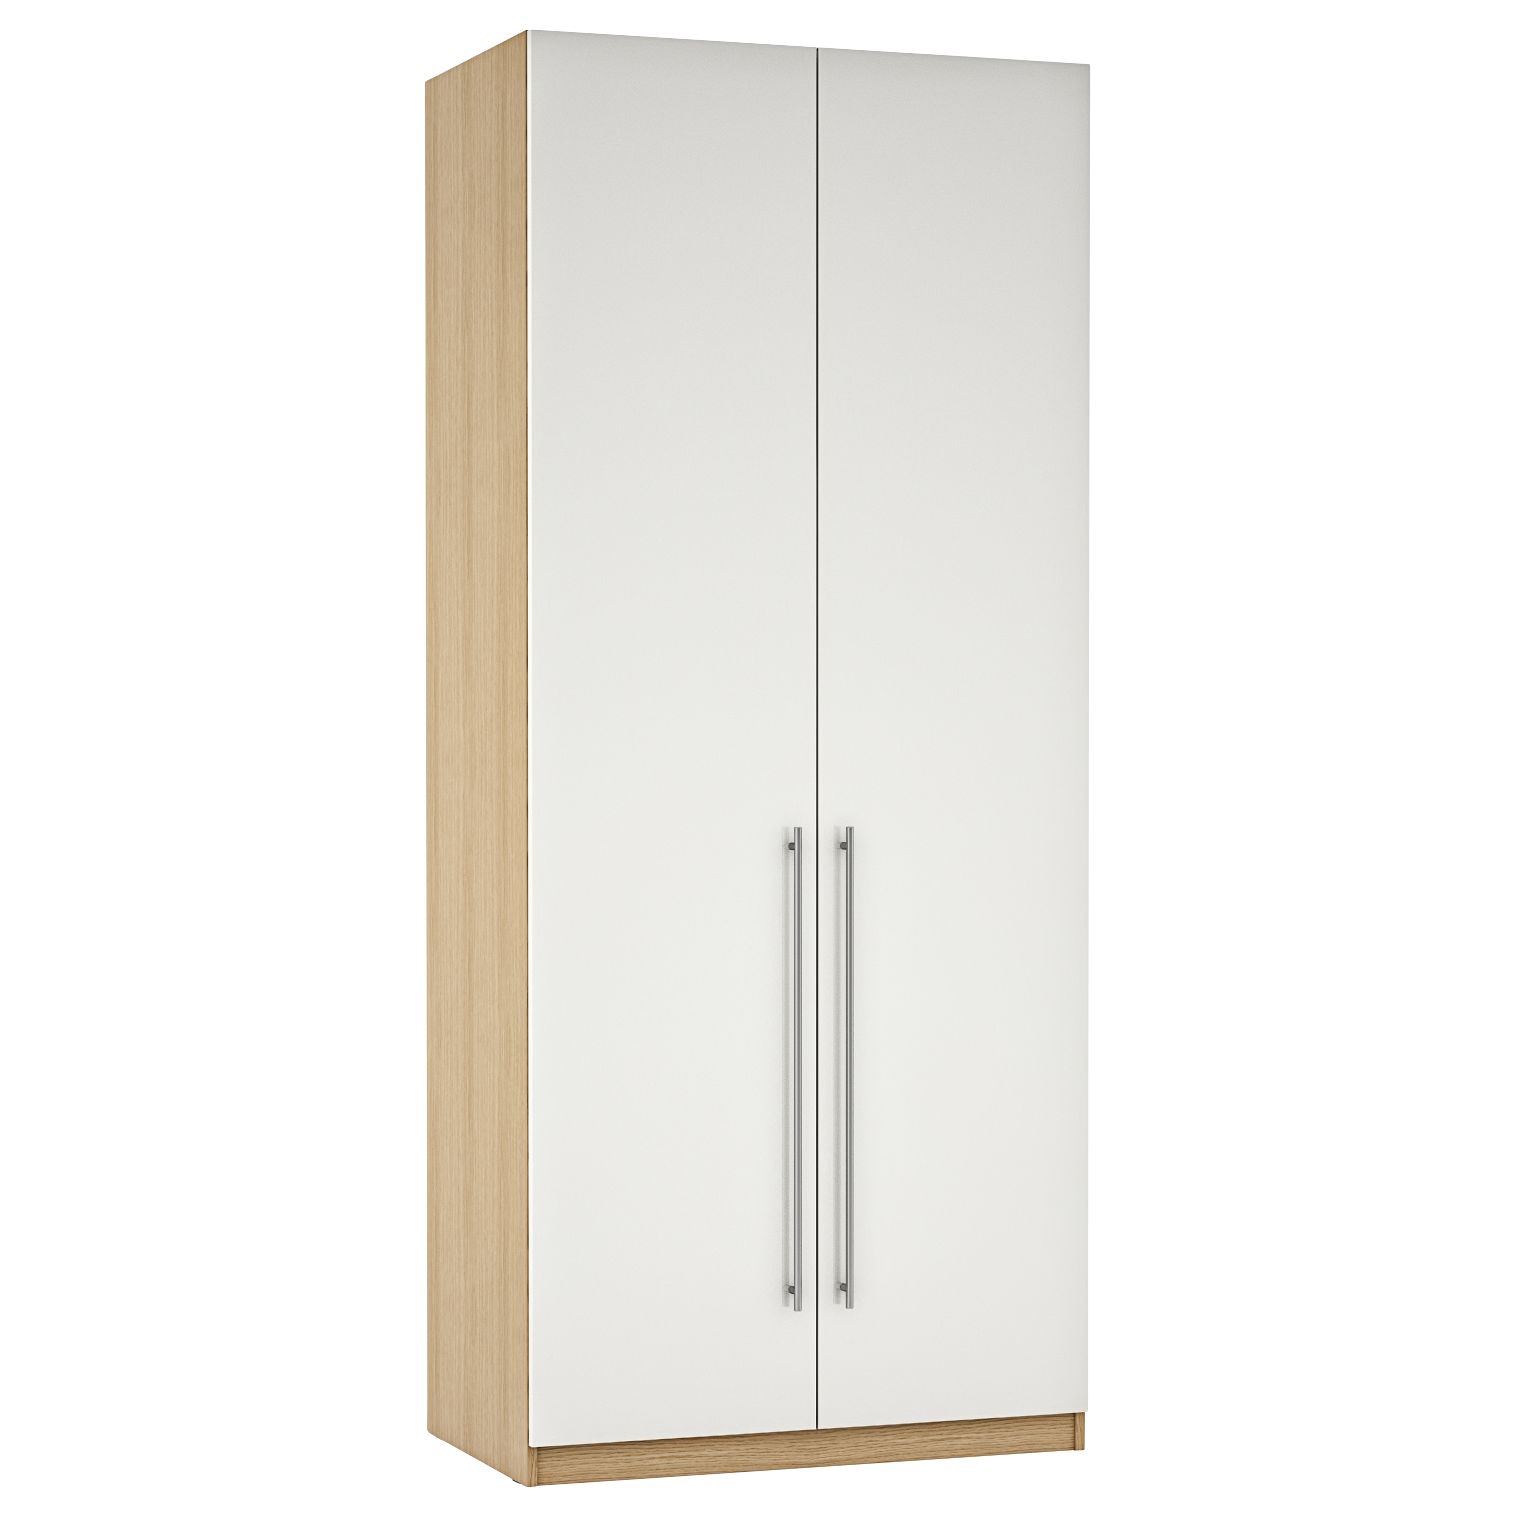 John Lewis ANYDAY Mix It Tall Double Wardrobe with Long T-bar Handles, Gloss White/Natural Oak